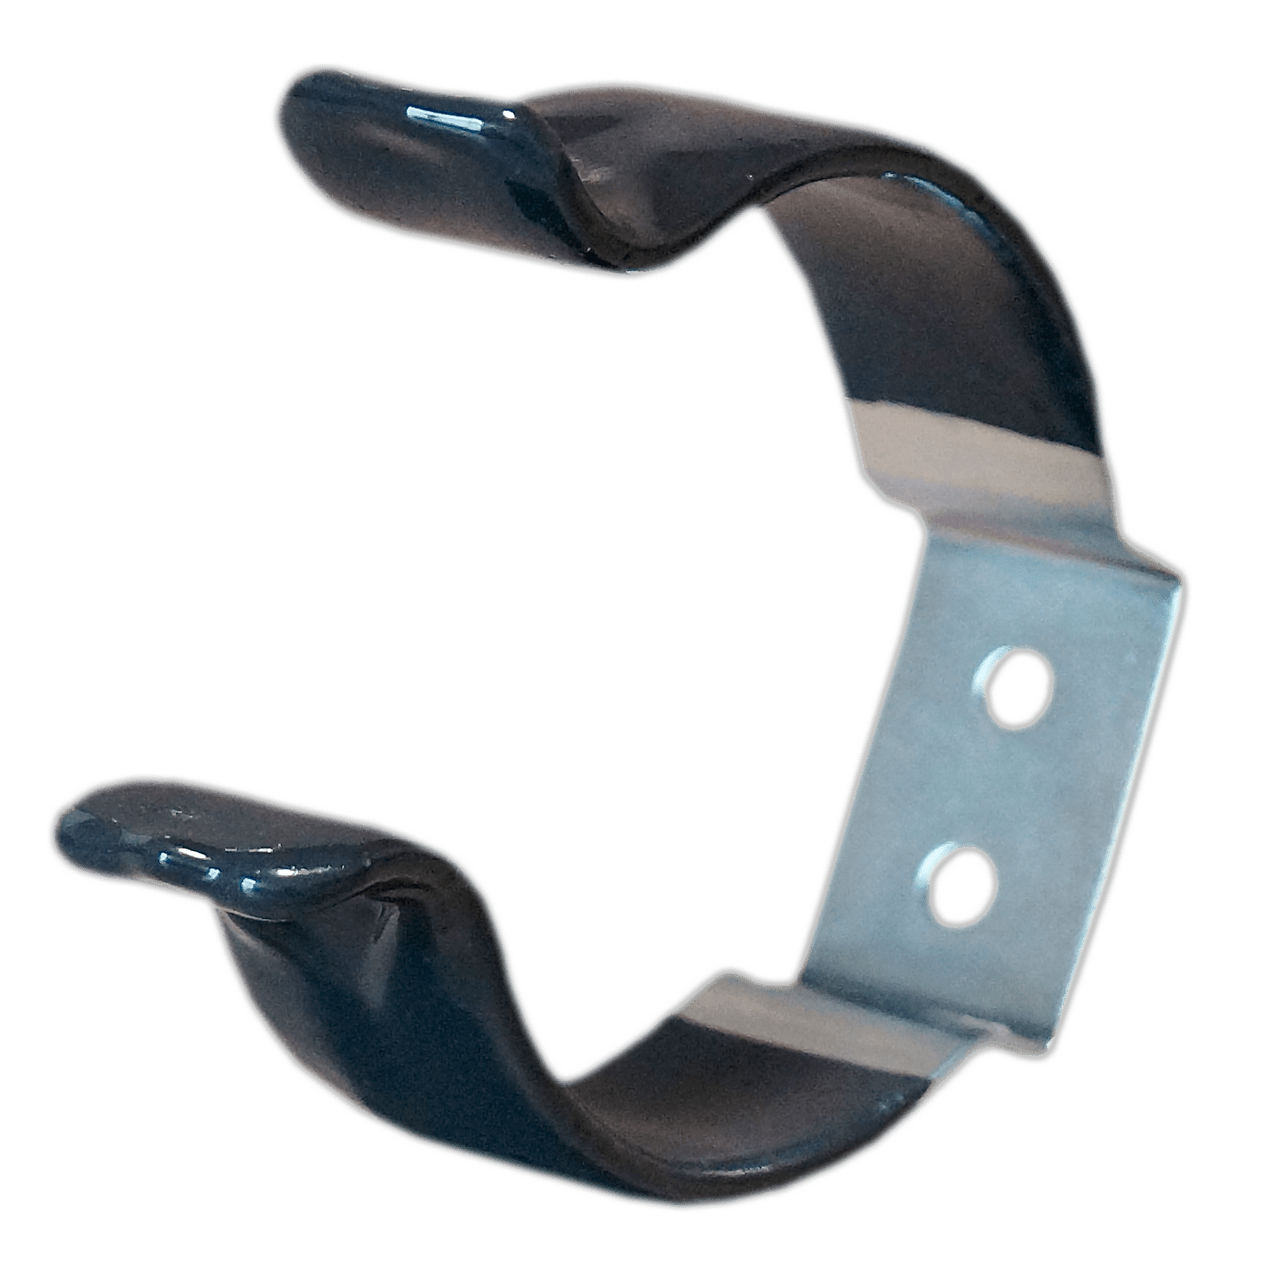 products-clamp__73231.1415822138.1280.1280.png